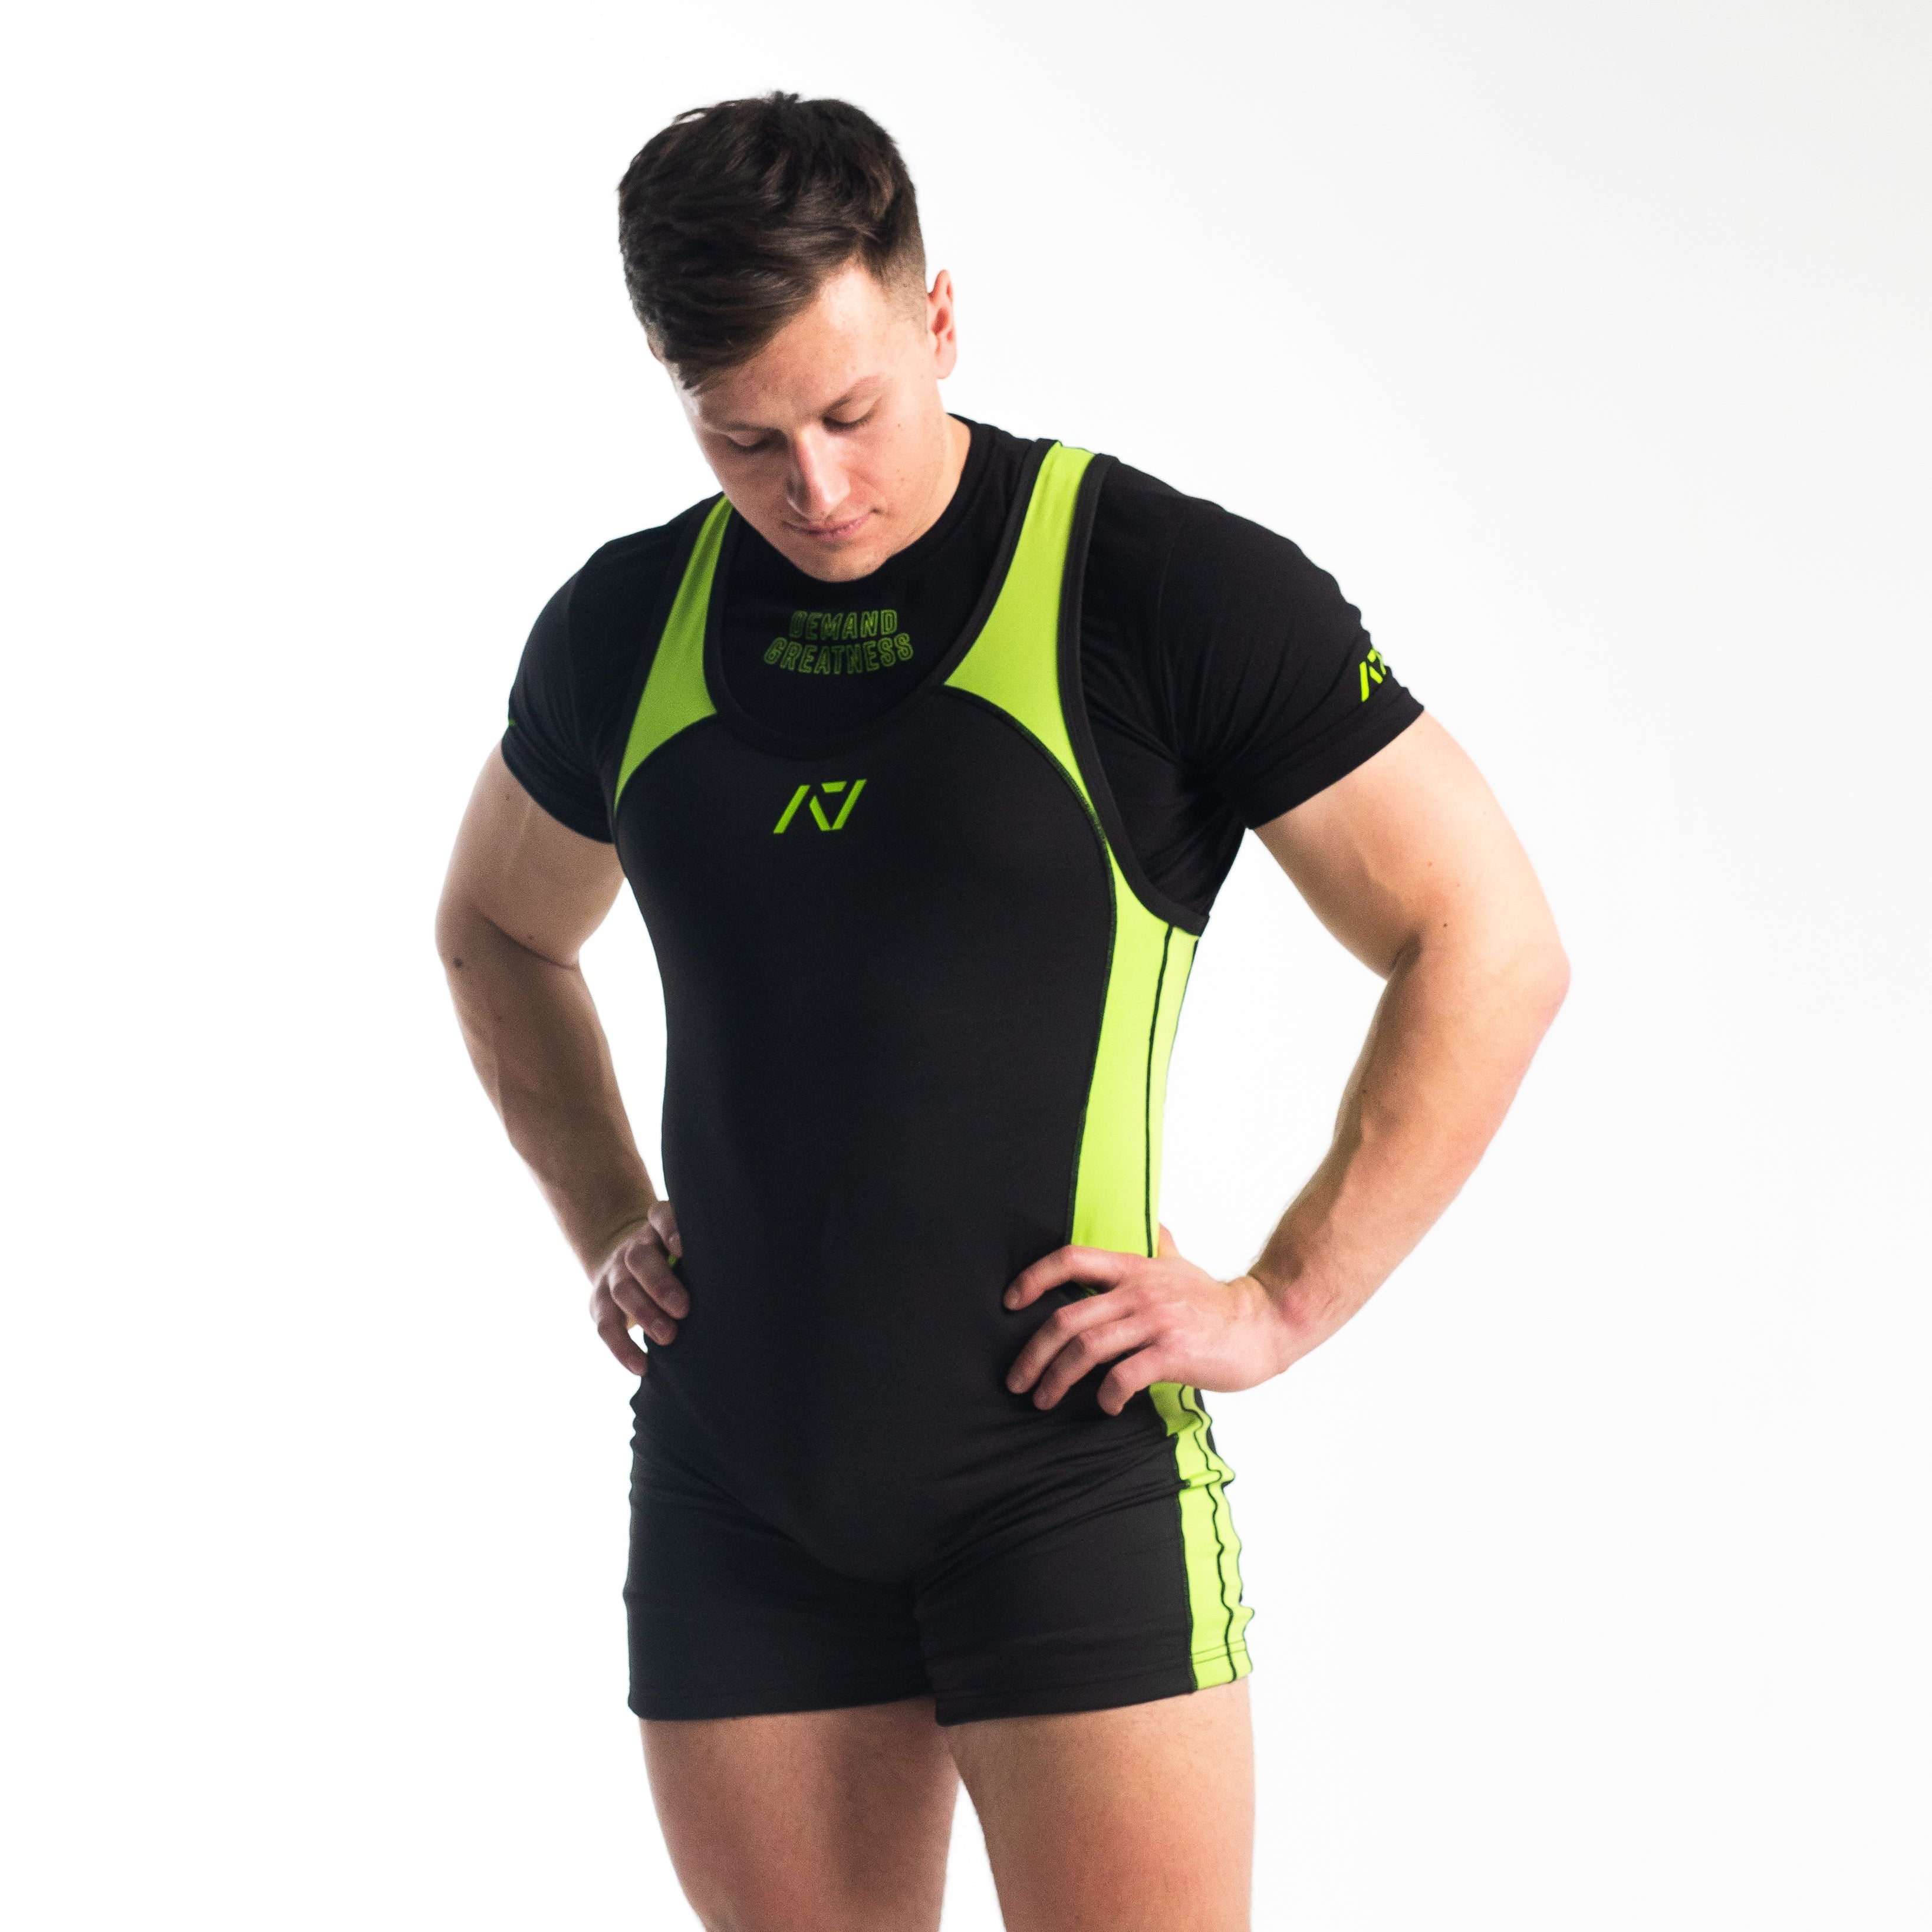 A7 IPF Approved Alien Luno singlet features extra lat mobility, side panel stitching to guide the squat depth level and curved panel design for a slimming look. The Women's cut singlet features a tapered waist and additional quad room. The IPF Approved Kit includes Powerlifting Singlet, A7 Meet Shirt, Deadlift Socks, Hourglass Knee Sleeves (Stiff Knee Sleeves and Rigor Mortis Knee Sleeves). Genouillères powerlifting shipping to France, Spain, Ireland, Germany, Italy, Sweden and EU. 